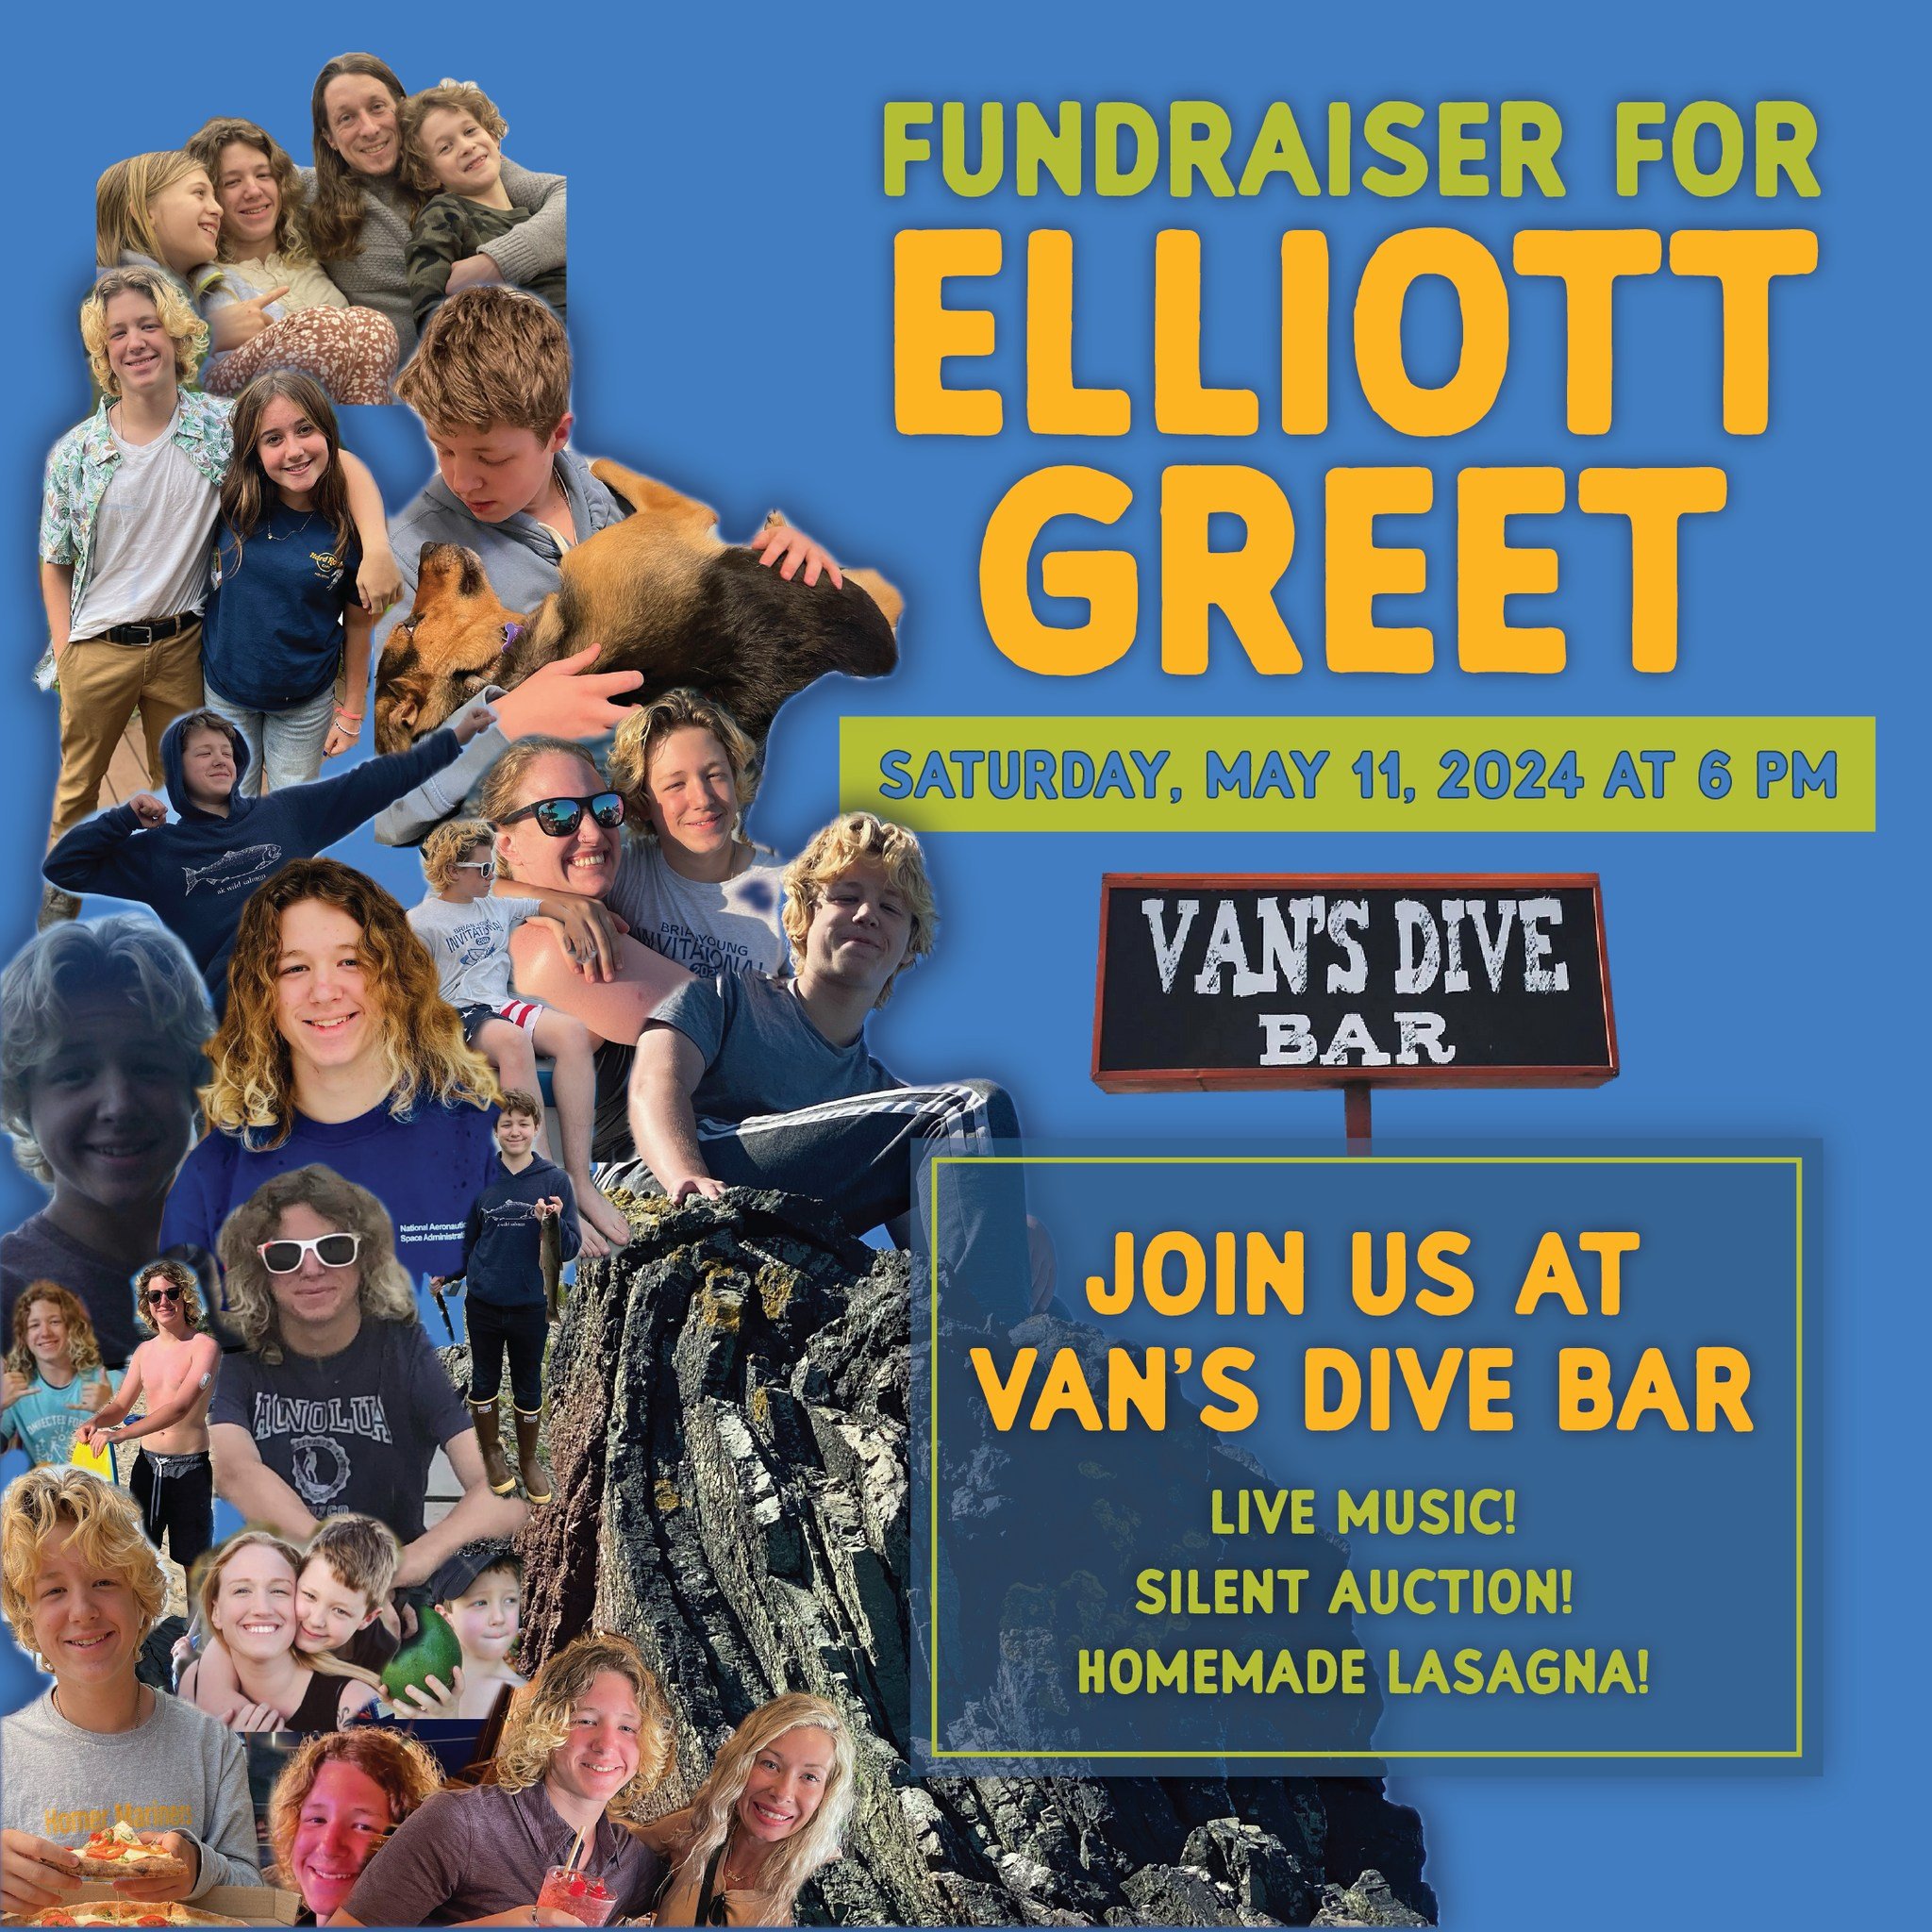 Friends, the son of one of our former line cooks was terribly injured in an accident. Treatment and other expenses for his spinal cord injuries will cost almost $200K AFTER insurance. Our community is coming together to raise money at @vansdivebar on